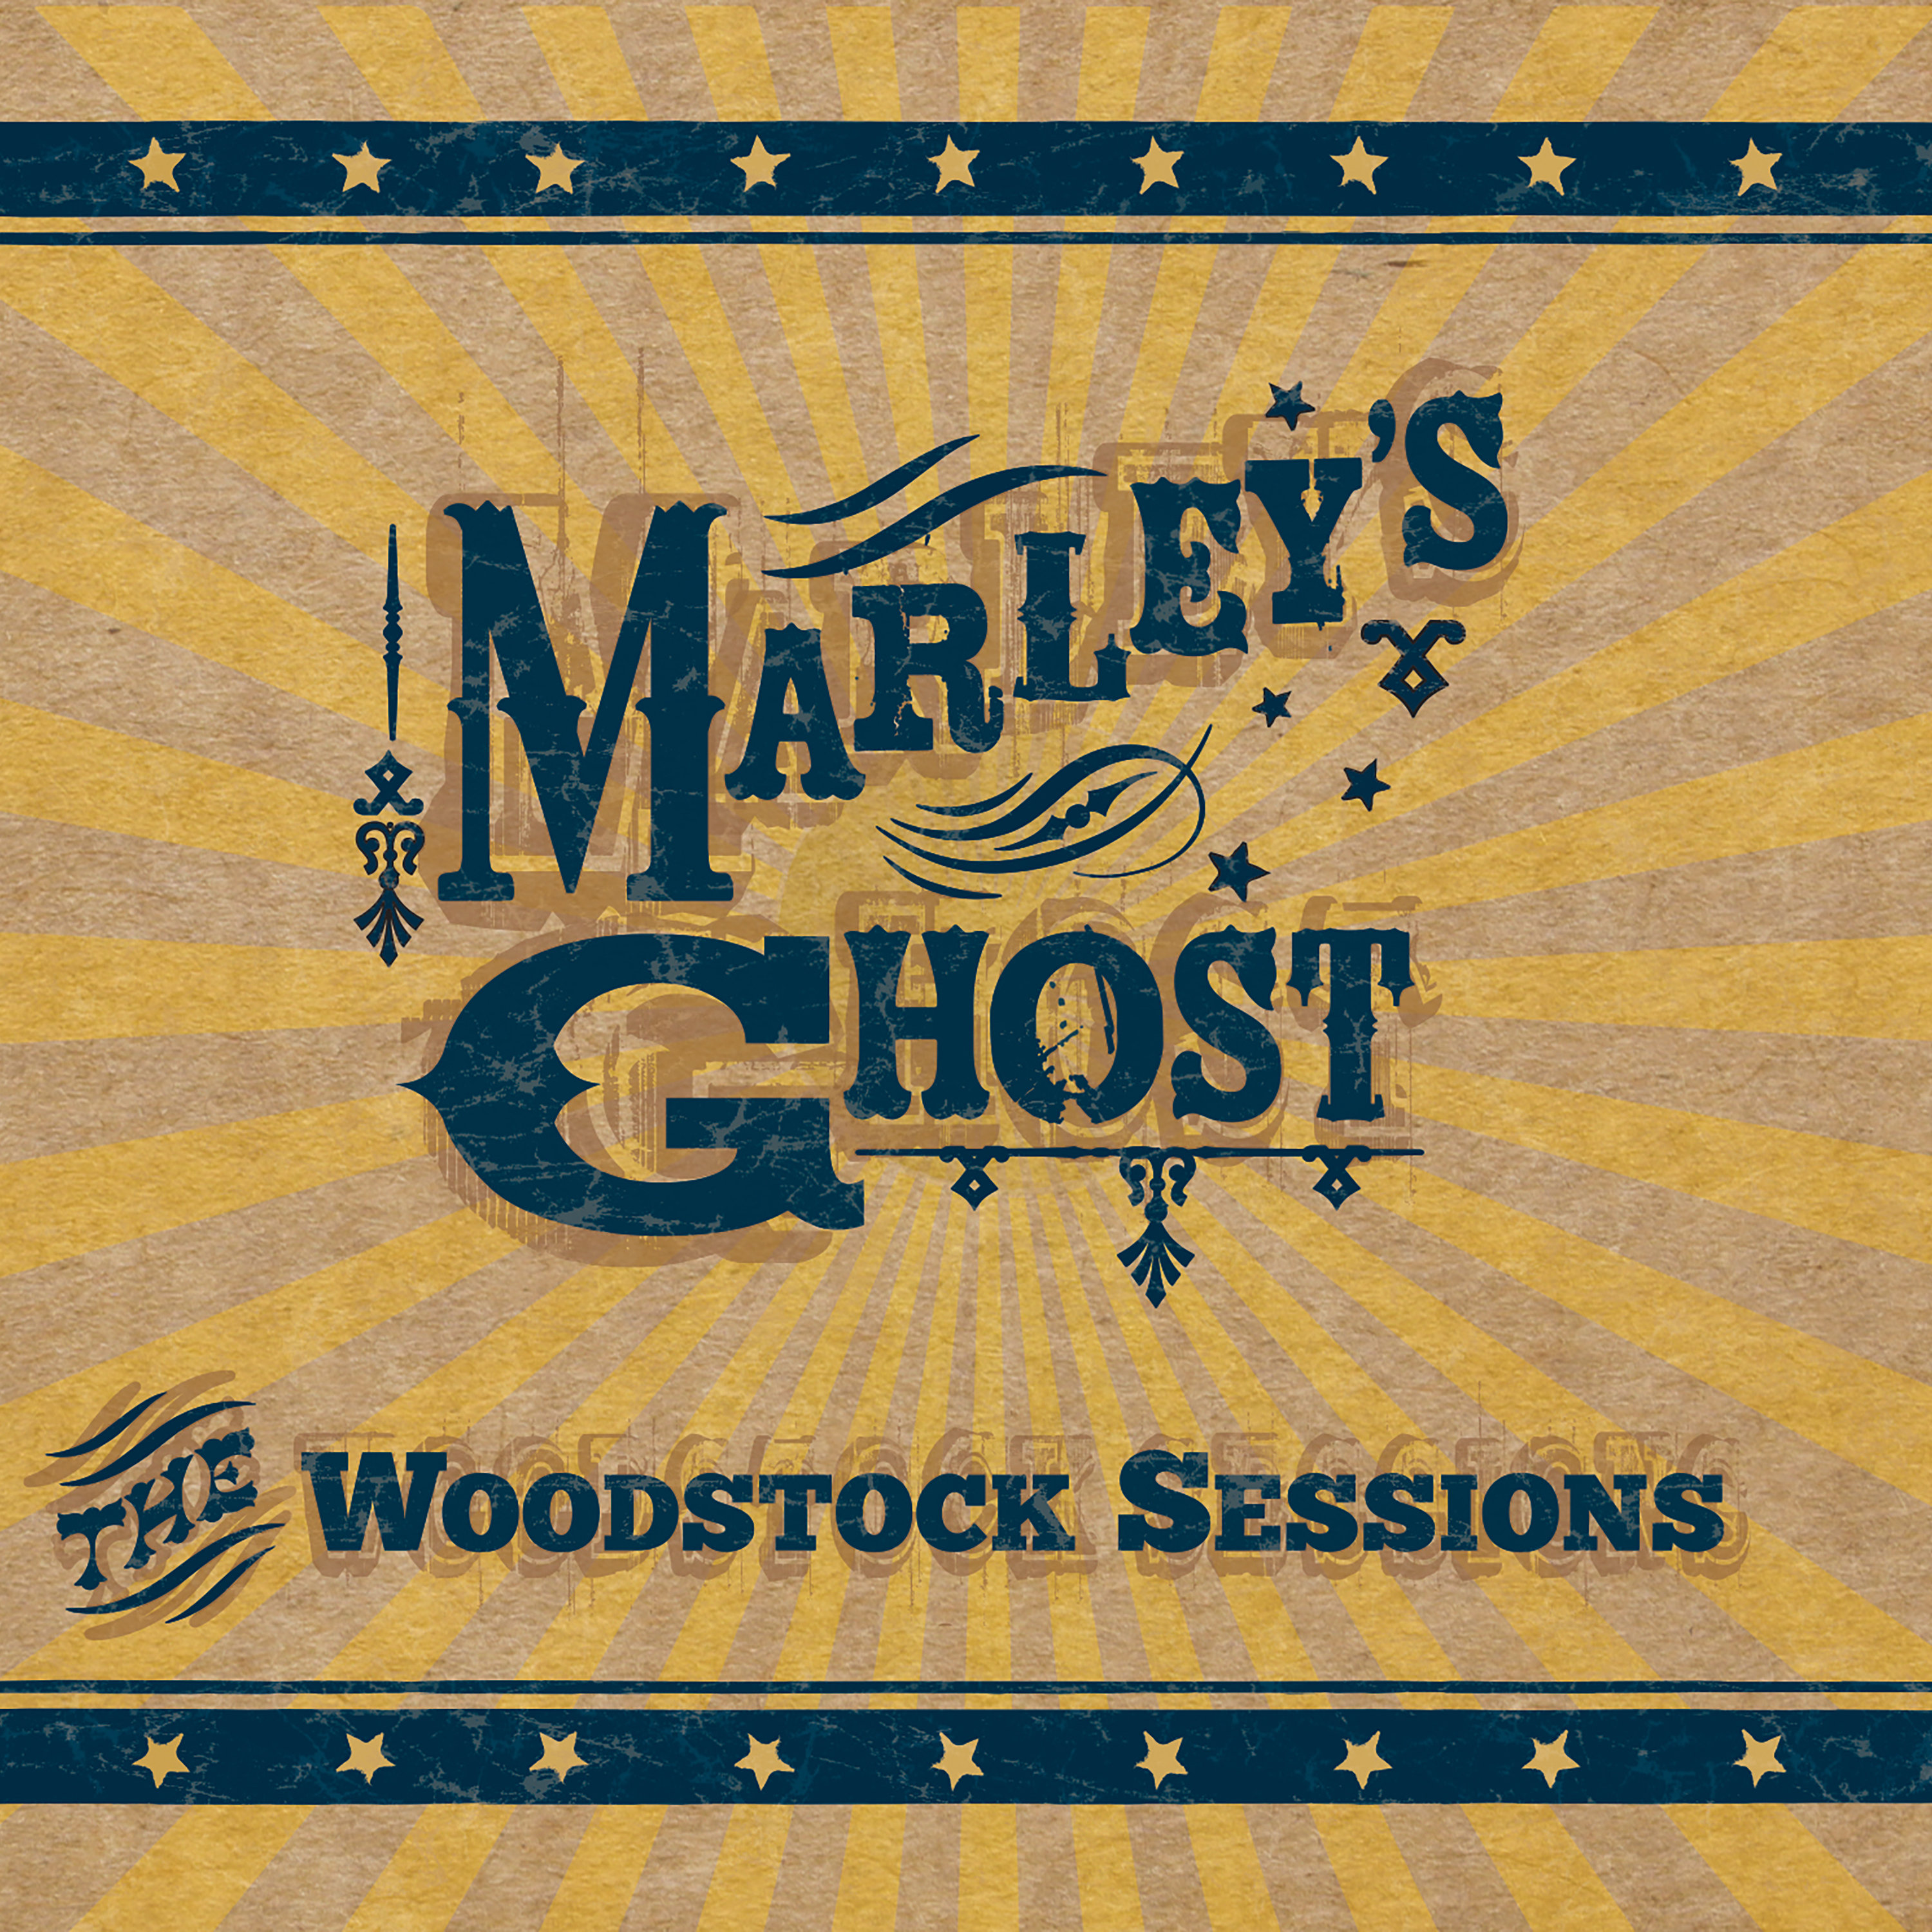 The Woodstock Sessions